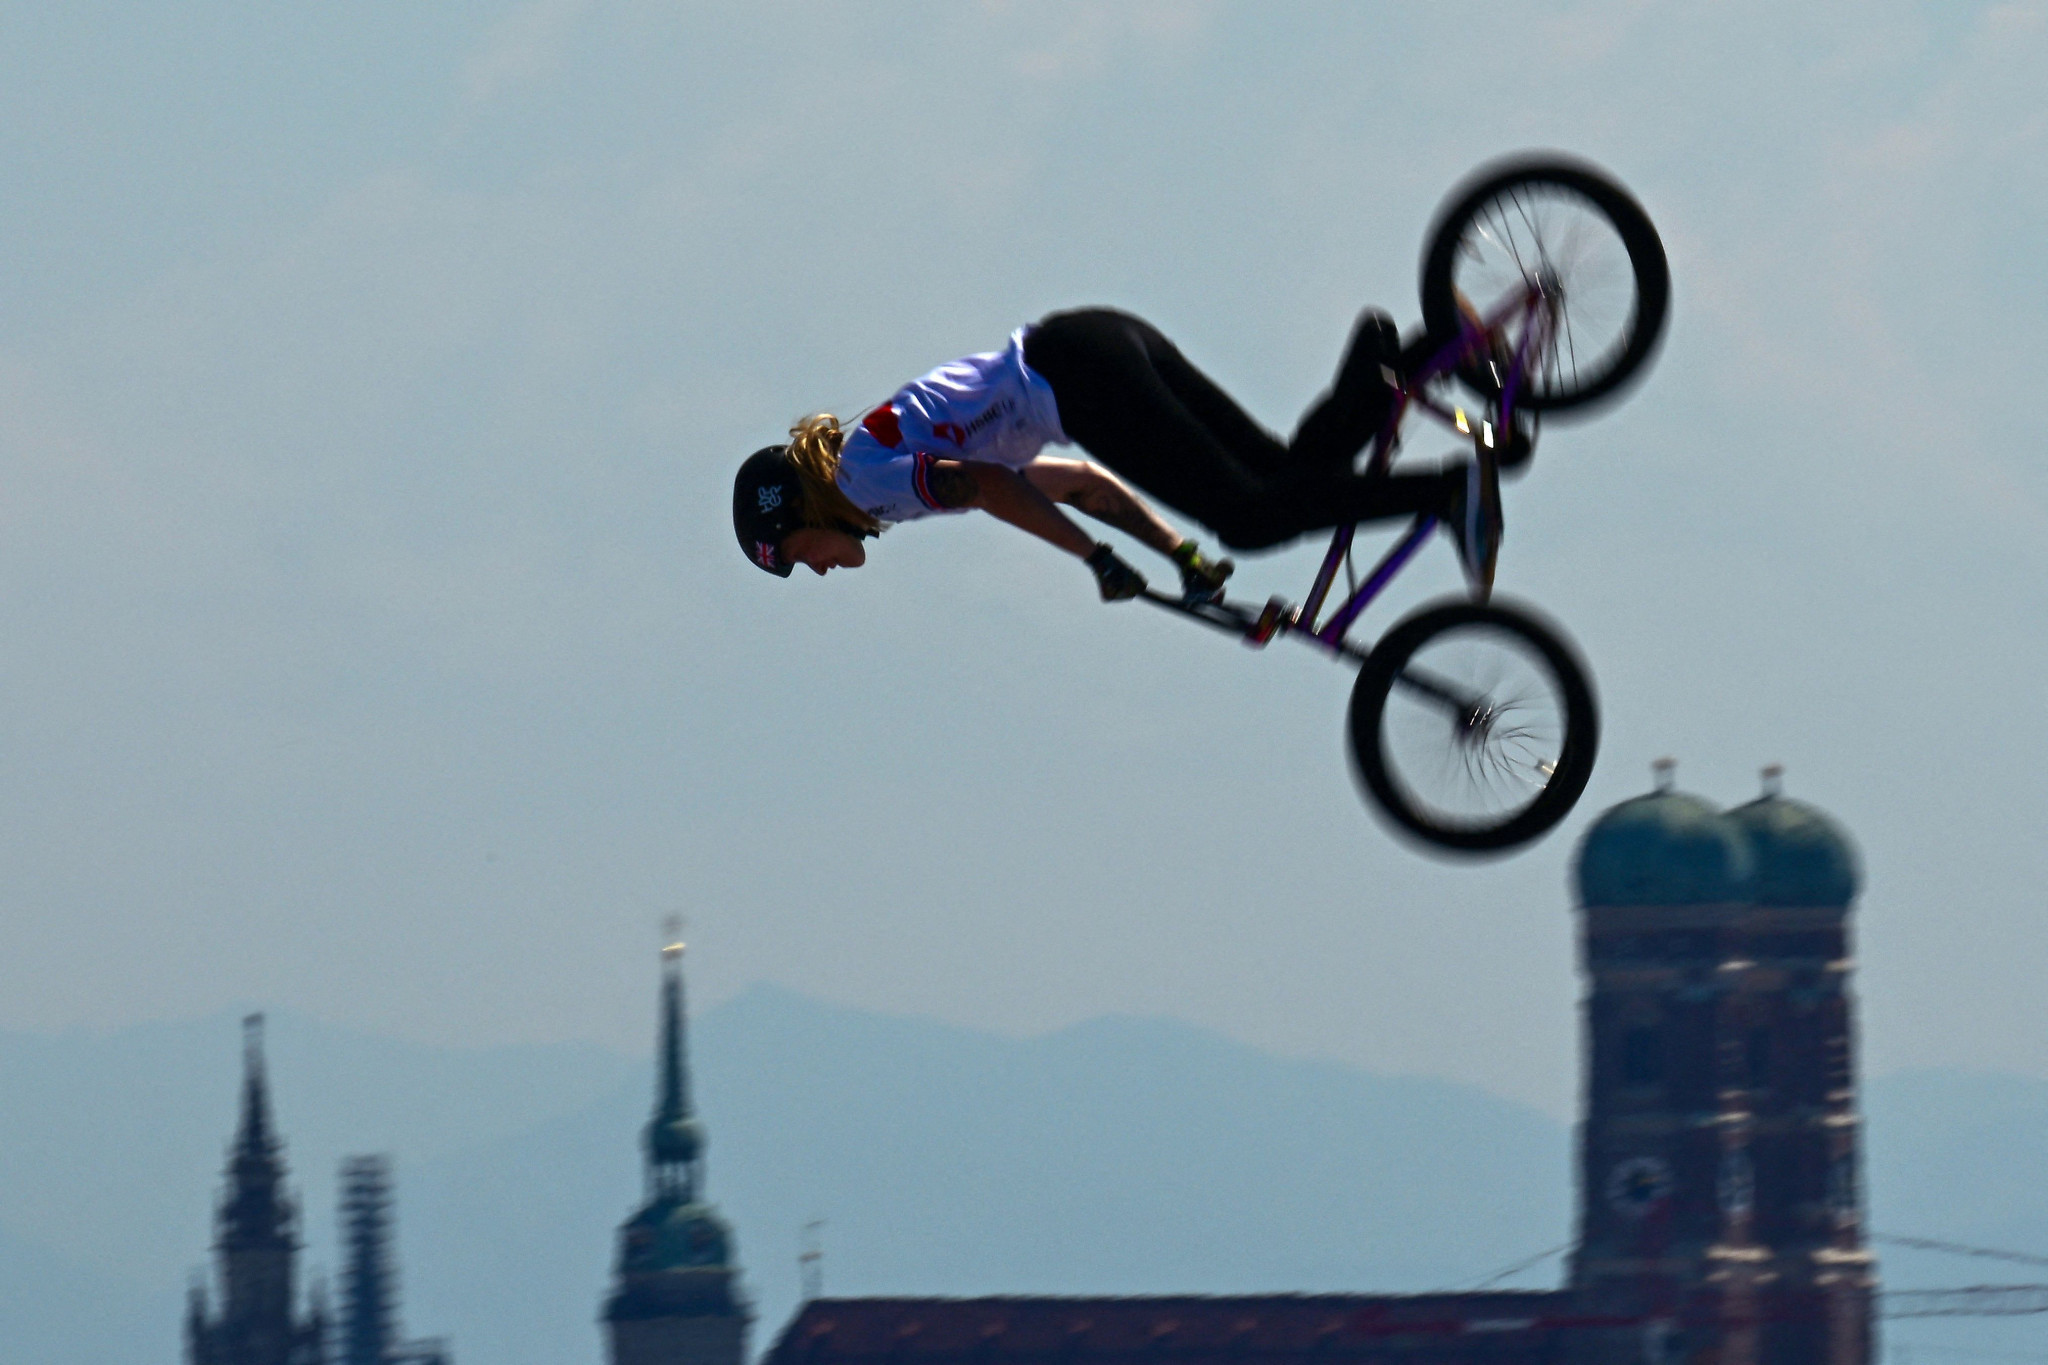 BMX riders hoping for Paris 2024 points at UCI Urban Cycling World Championships 